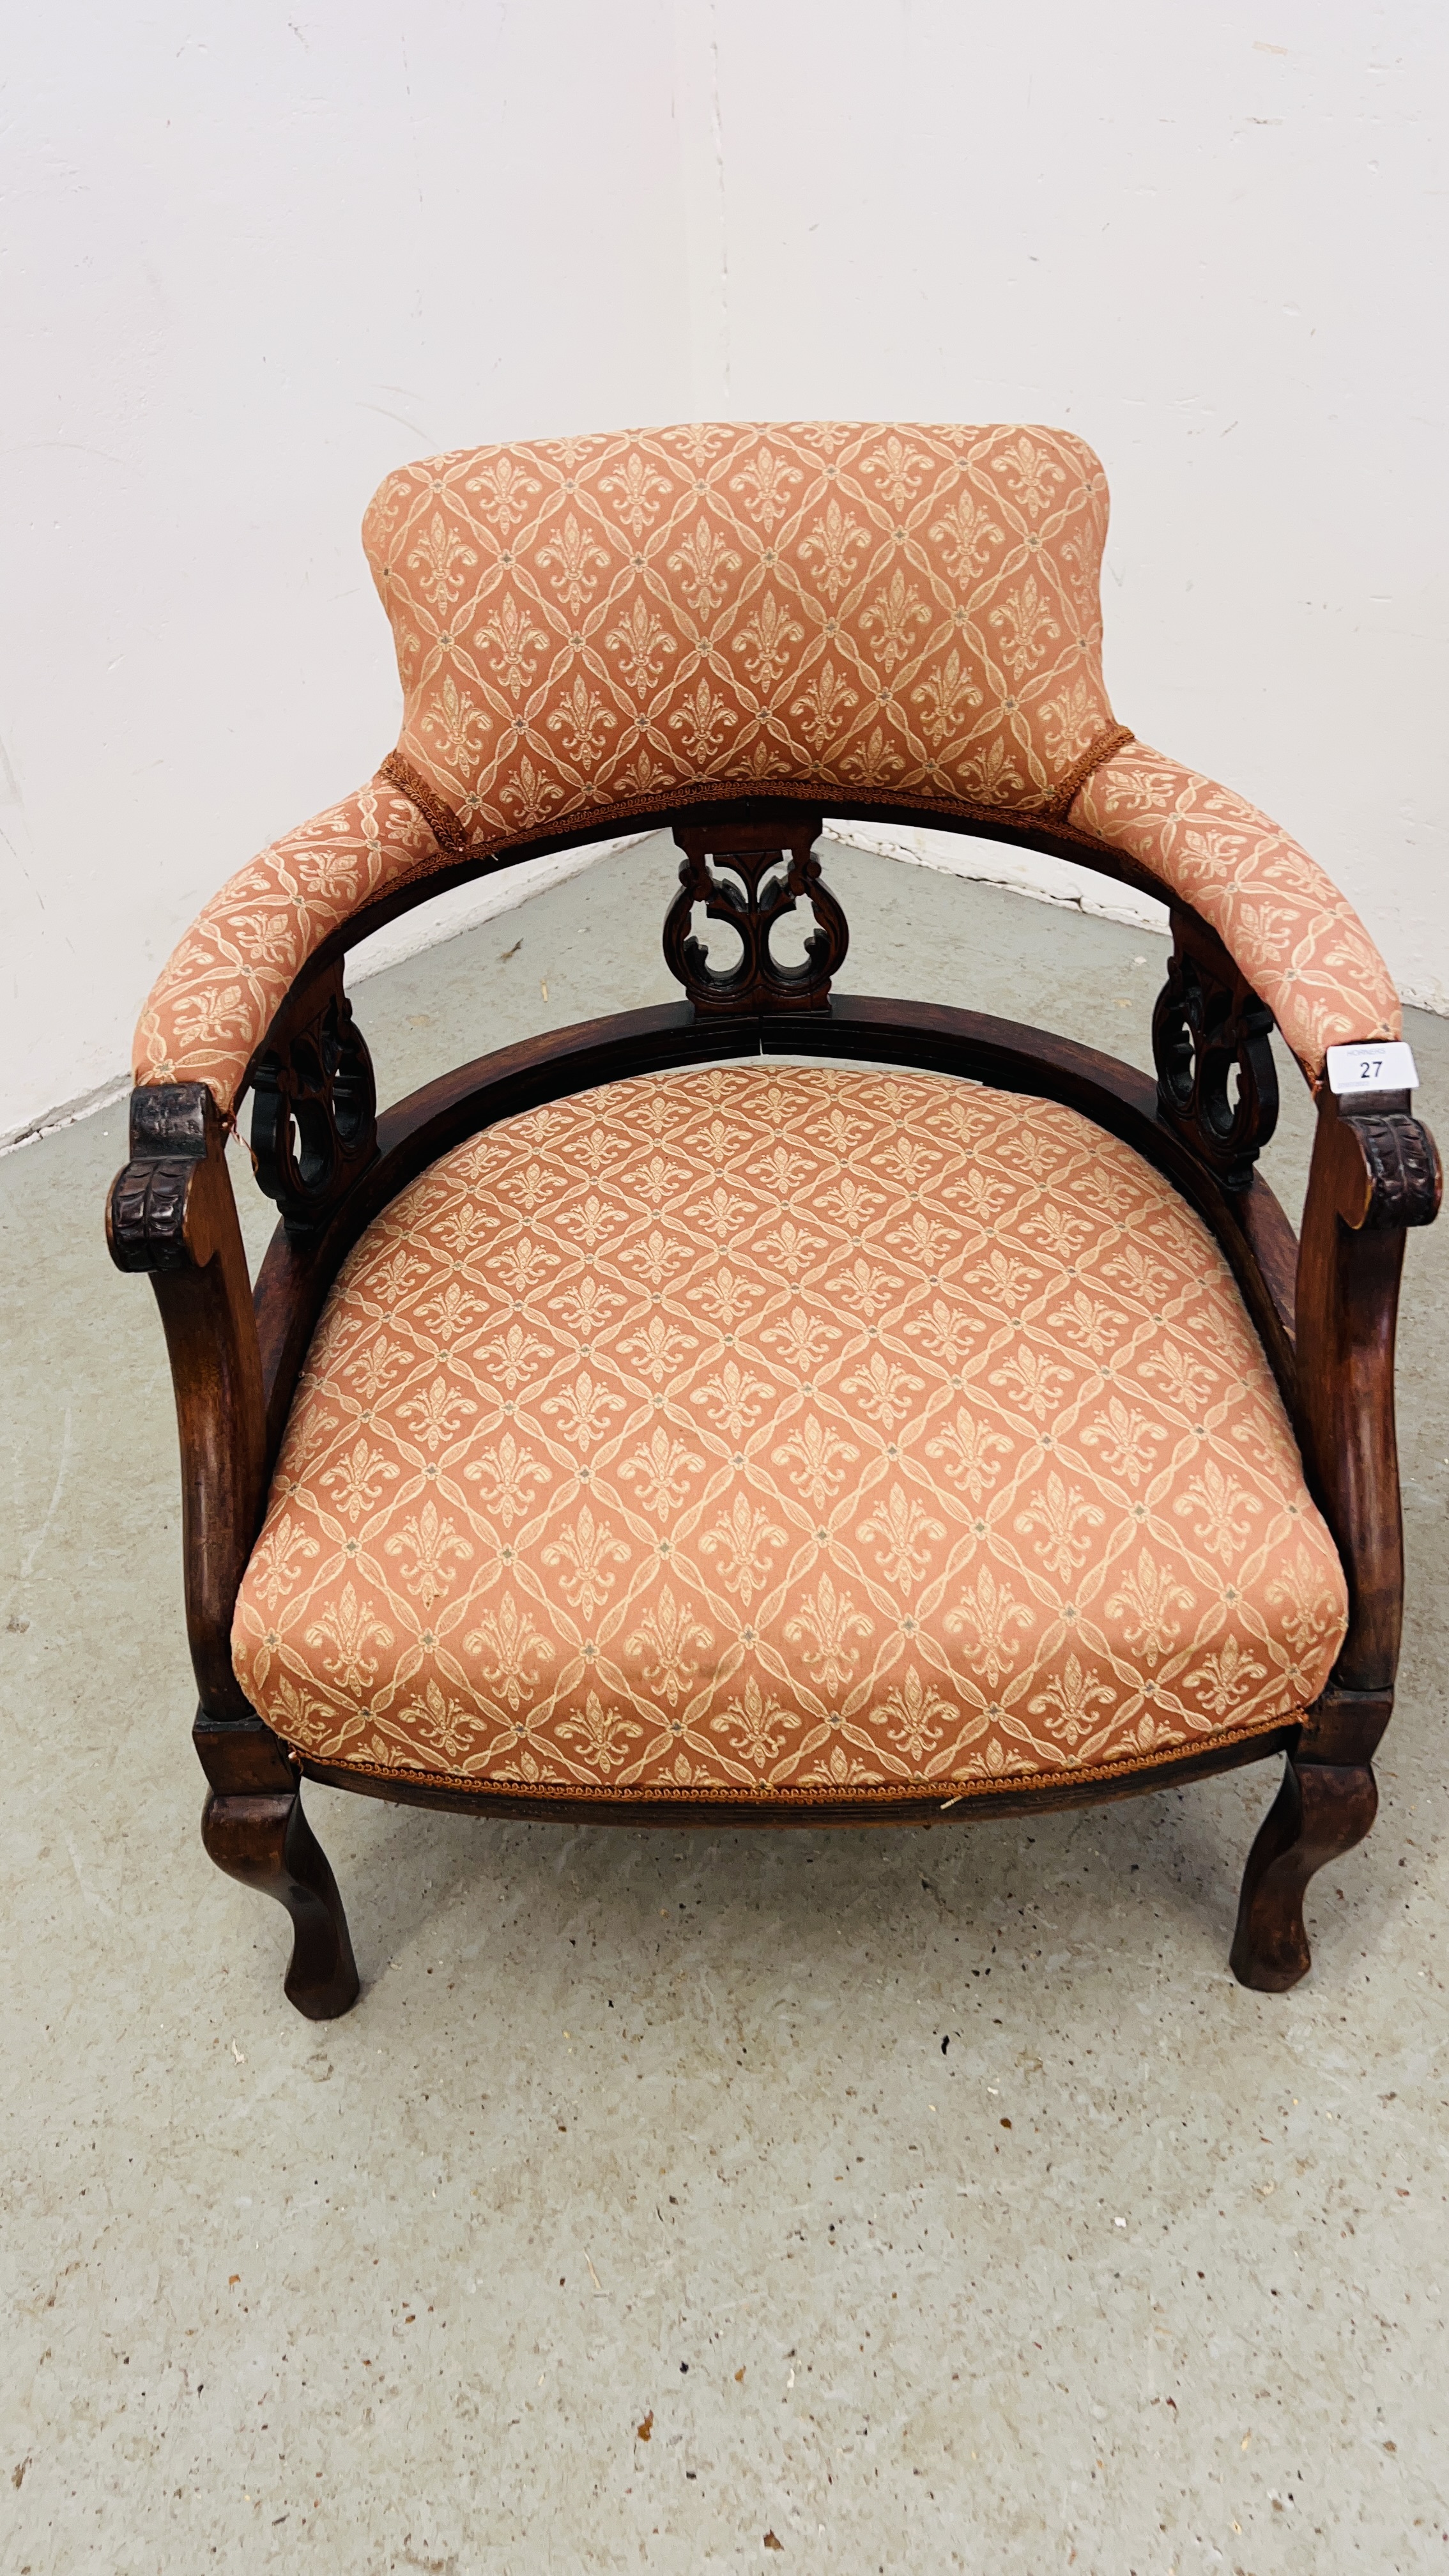 A PAIR OF MAHOGANY FRAMED TUB CHAIRS. - Image 3 of 10